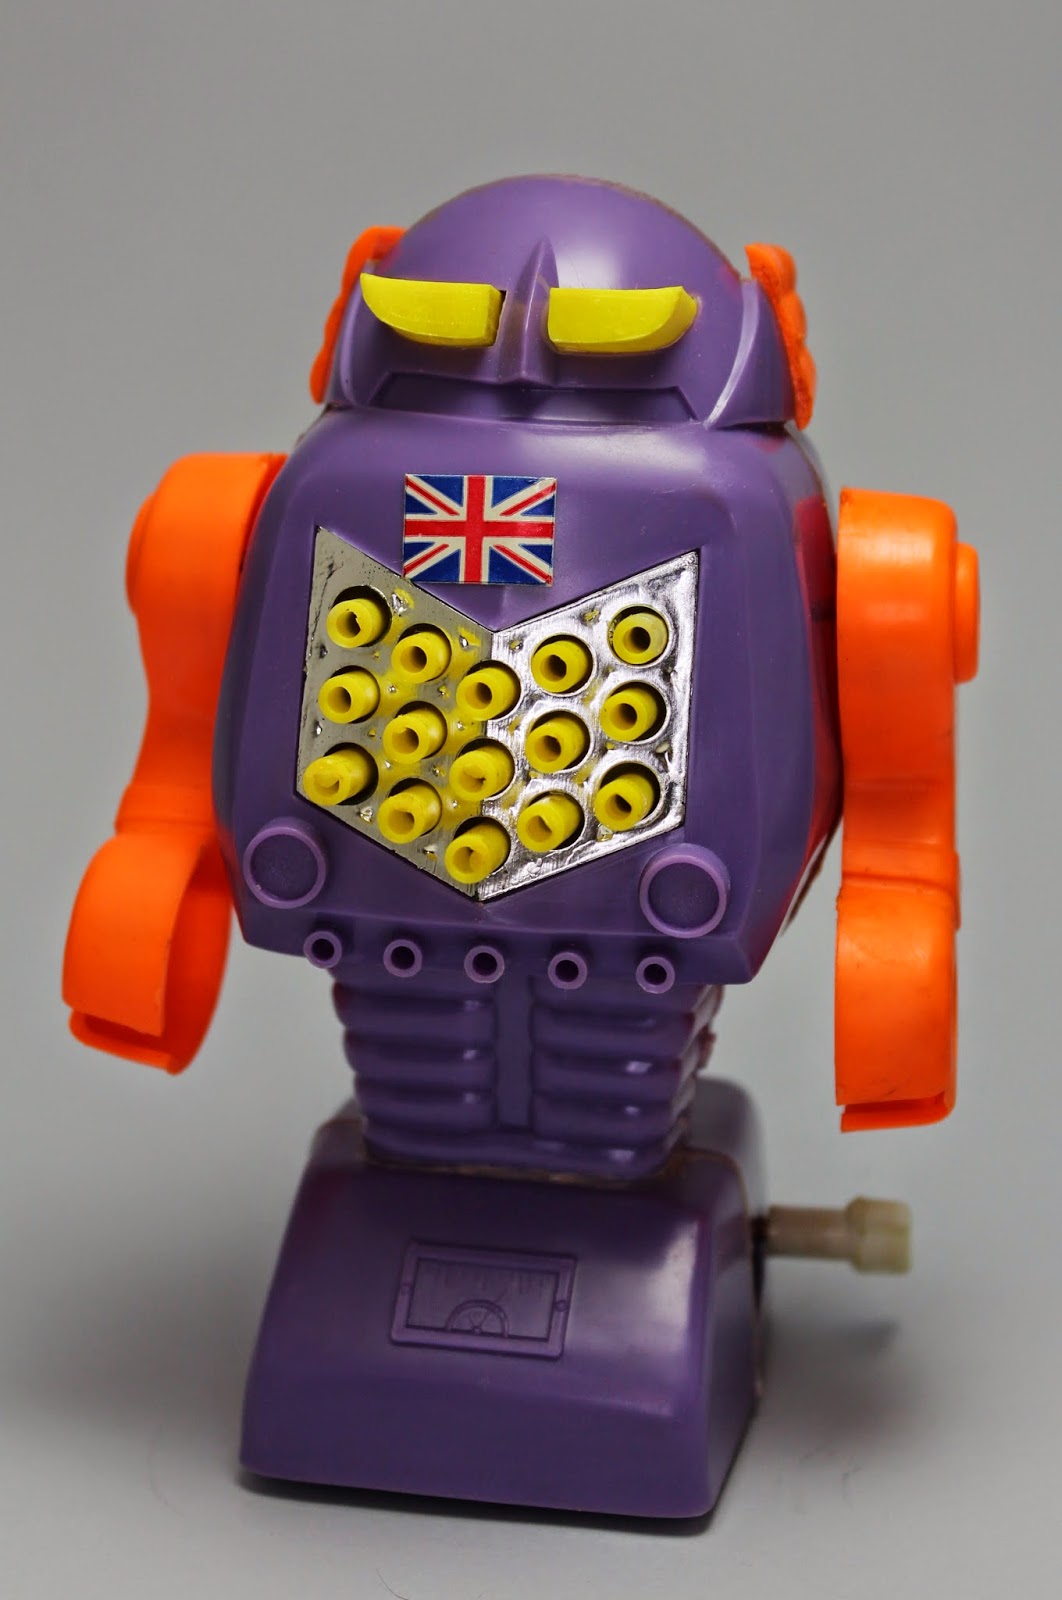 Geoff S Superheroes Space And Other Incredible Toys God Save The Queen Beep